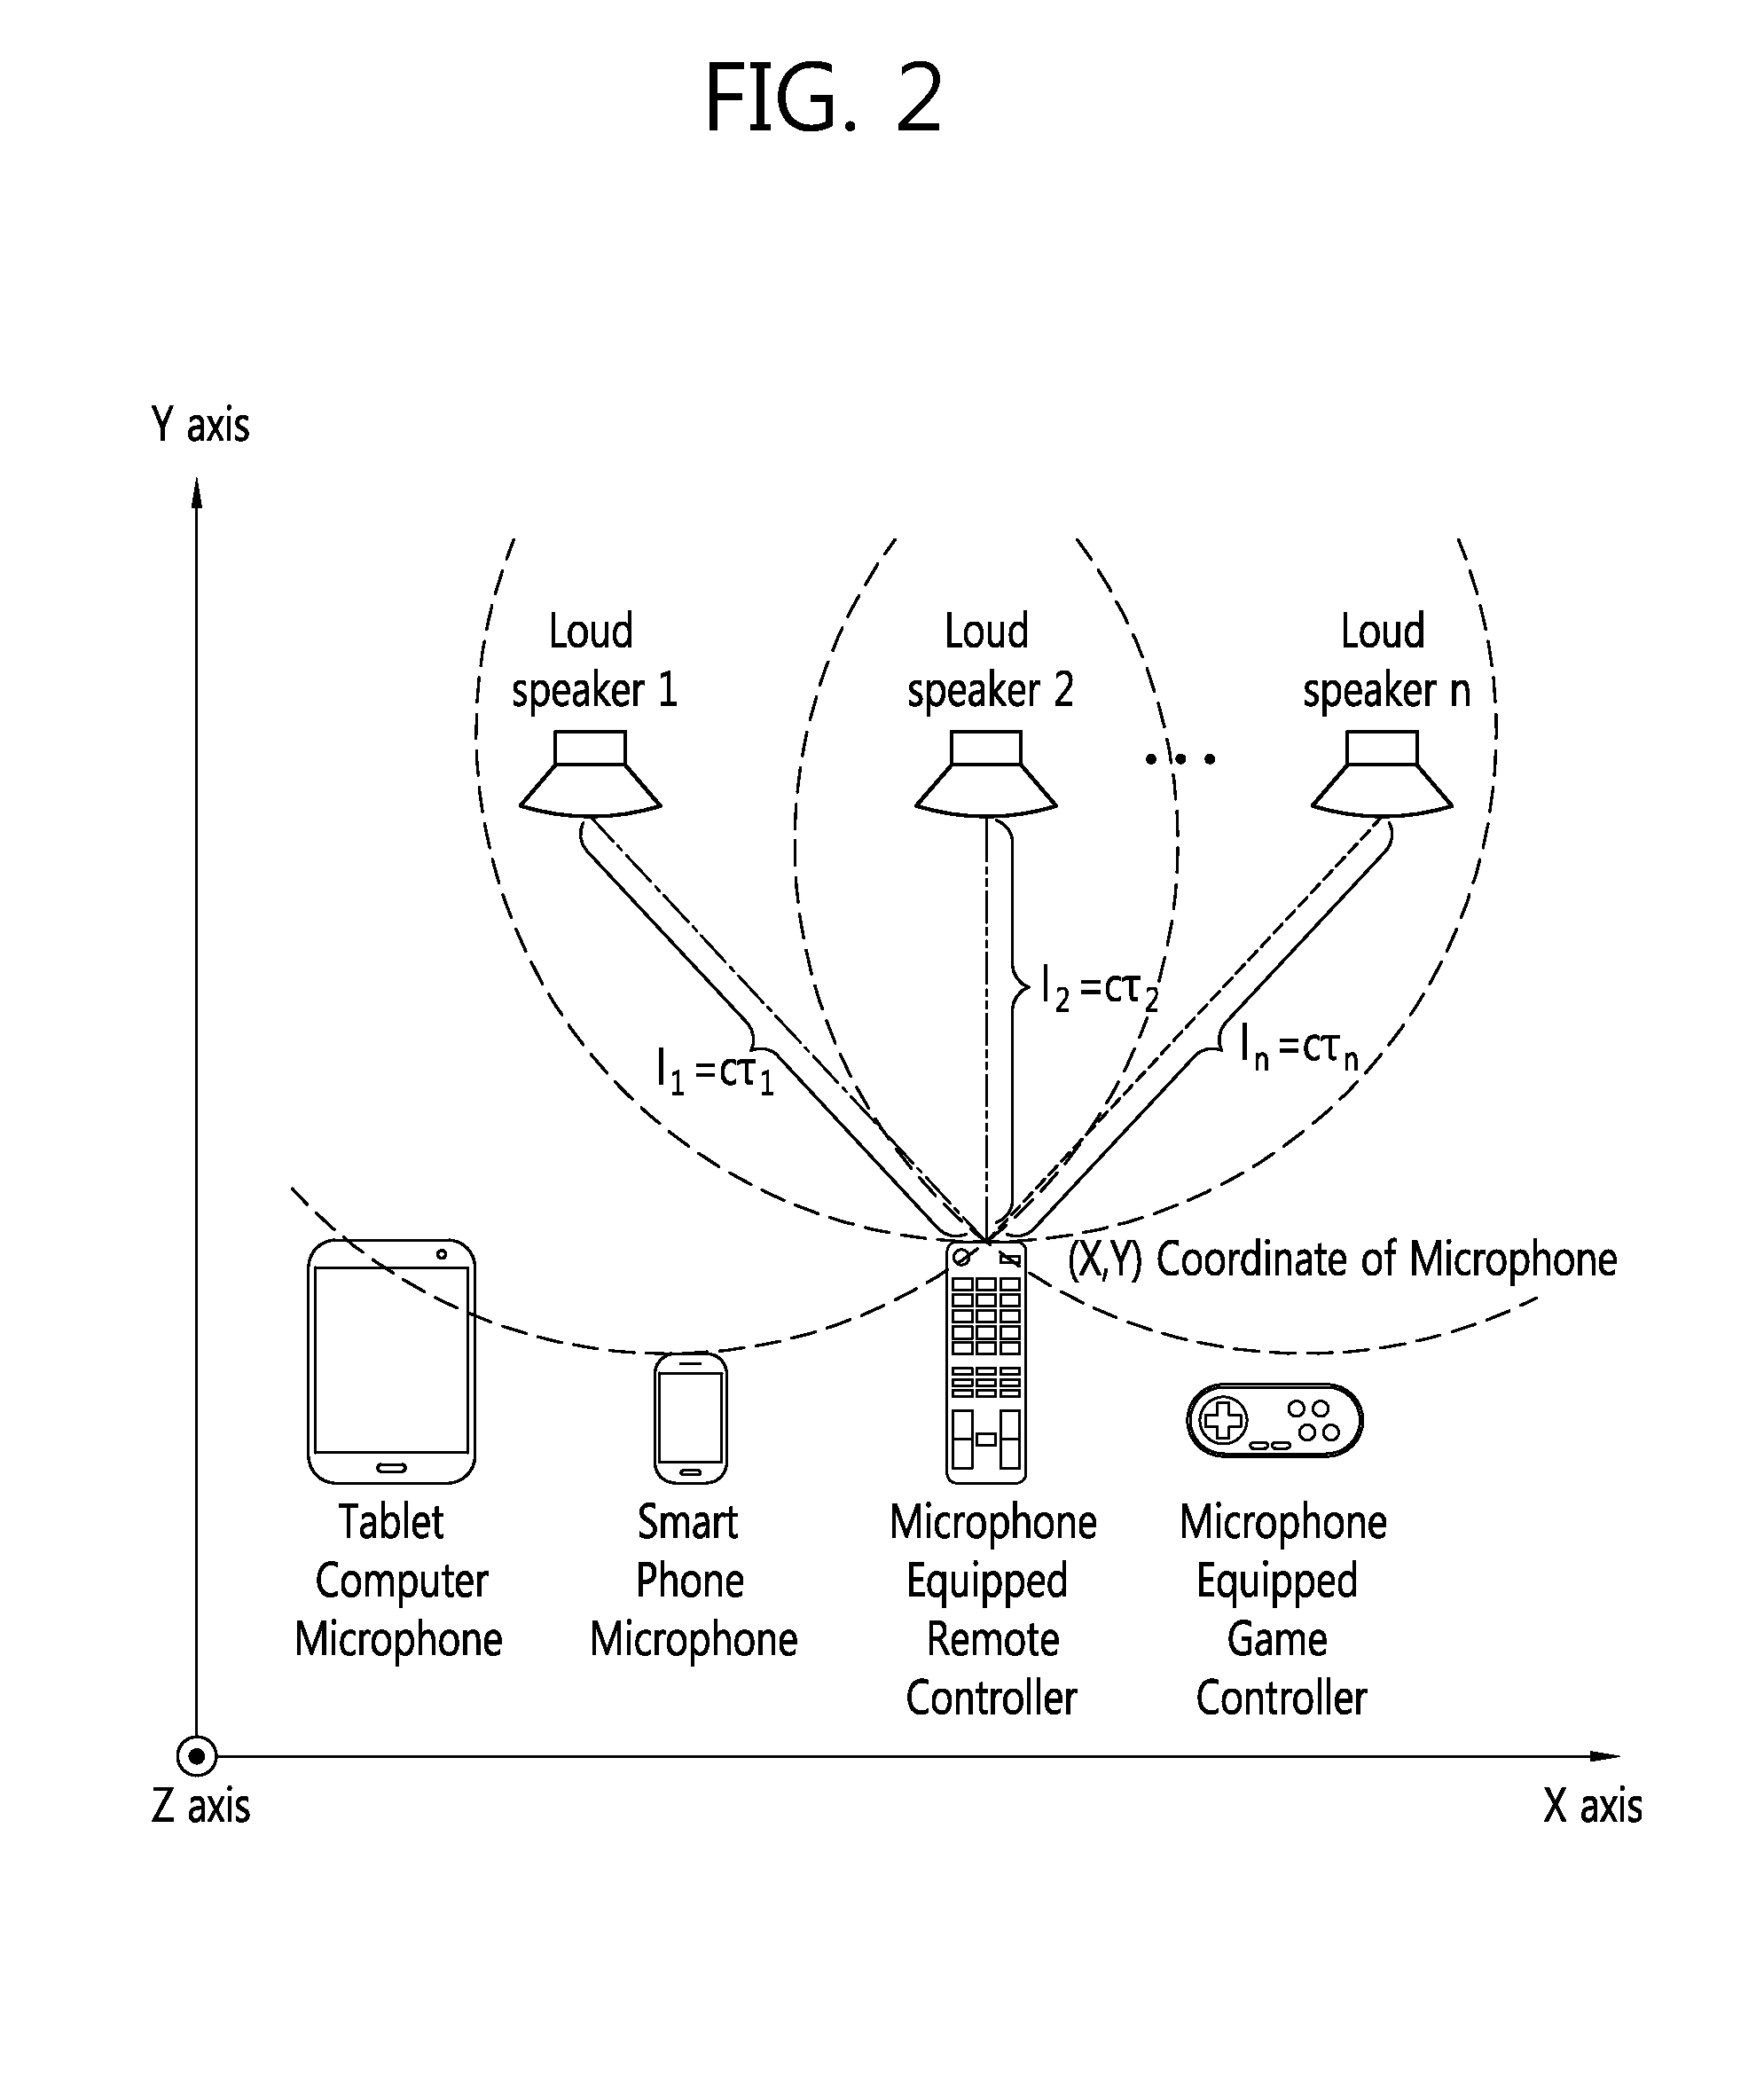 Position estimation system using an audio-embedded time-synchronization signal and position estimation method using the system